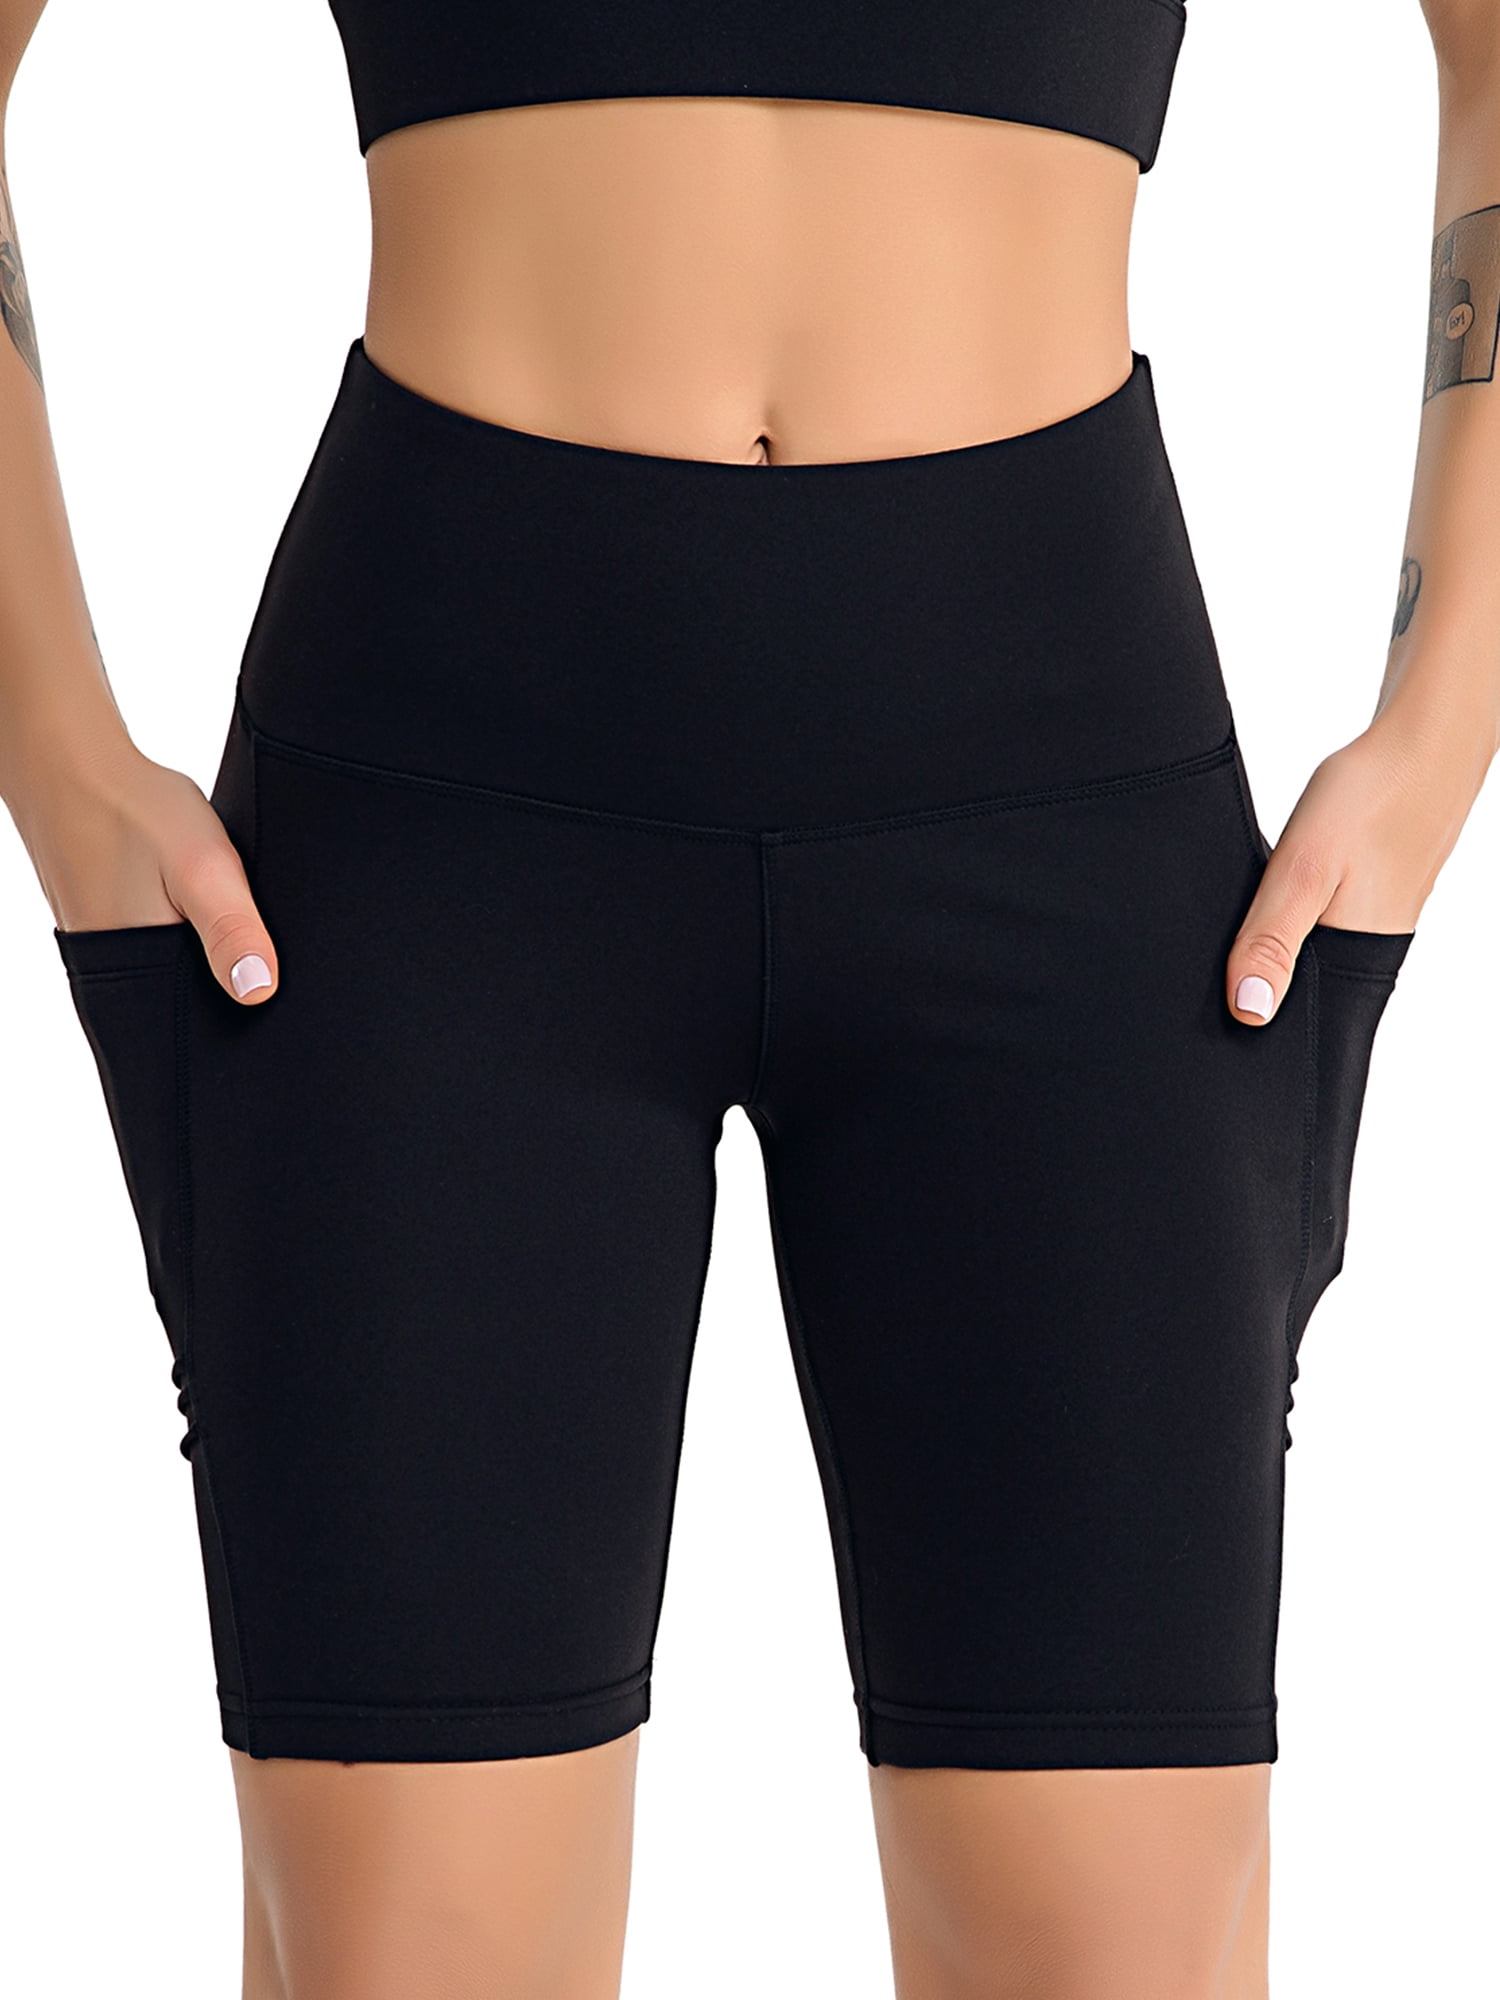 Kfnire Women's 5/8 High Waist Workout Yoga Shorts Non See Through Fitness Tights Butt Lifting Short Tummy Control 4-Way Stretch Yoga Leggings Booty Shorts Fitness Athletic Running Sports Shorts